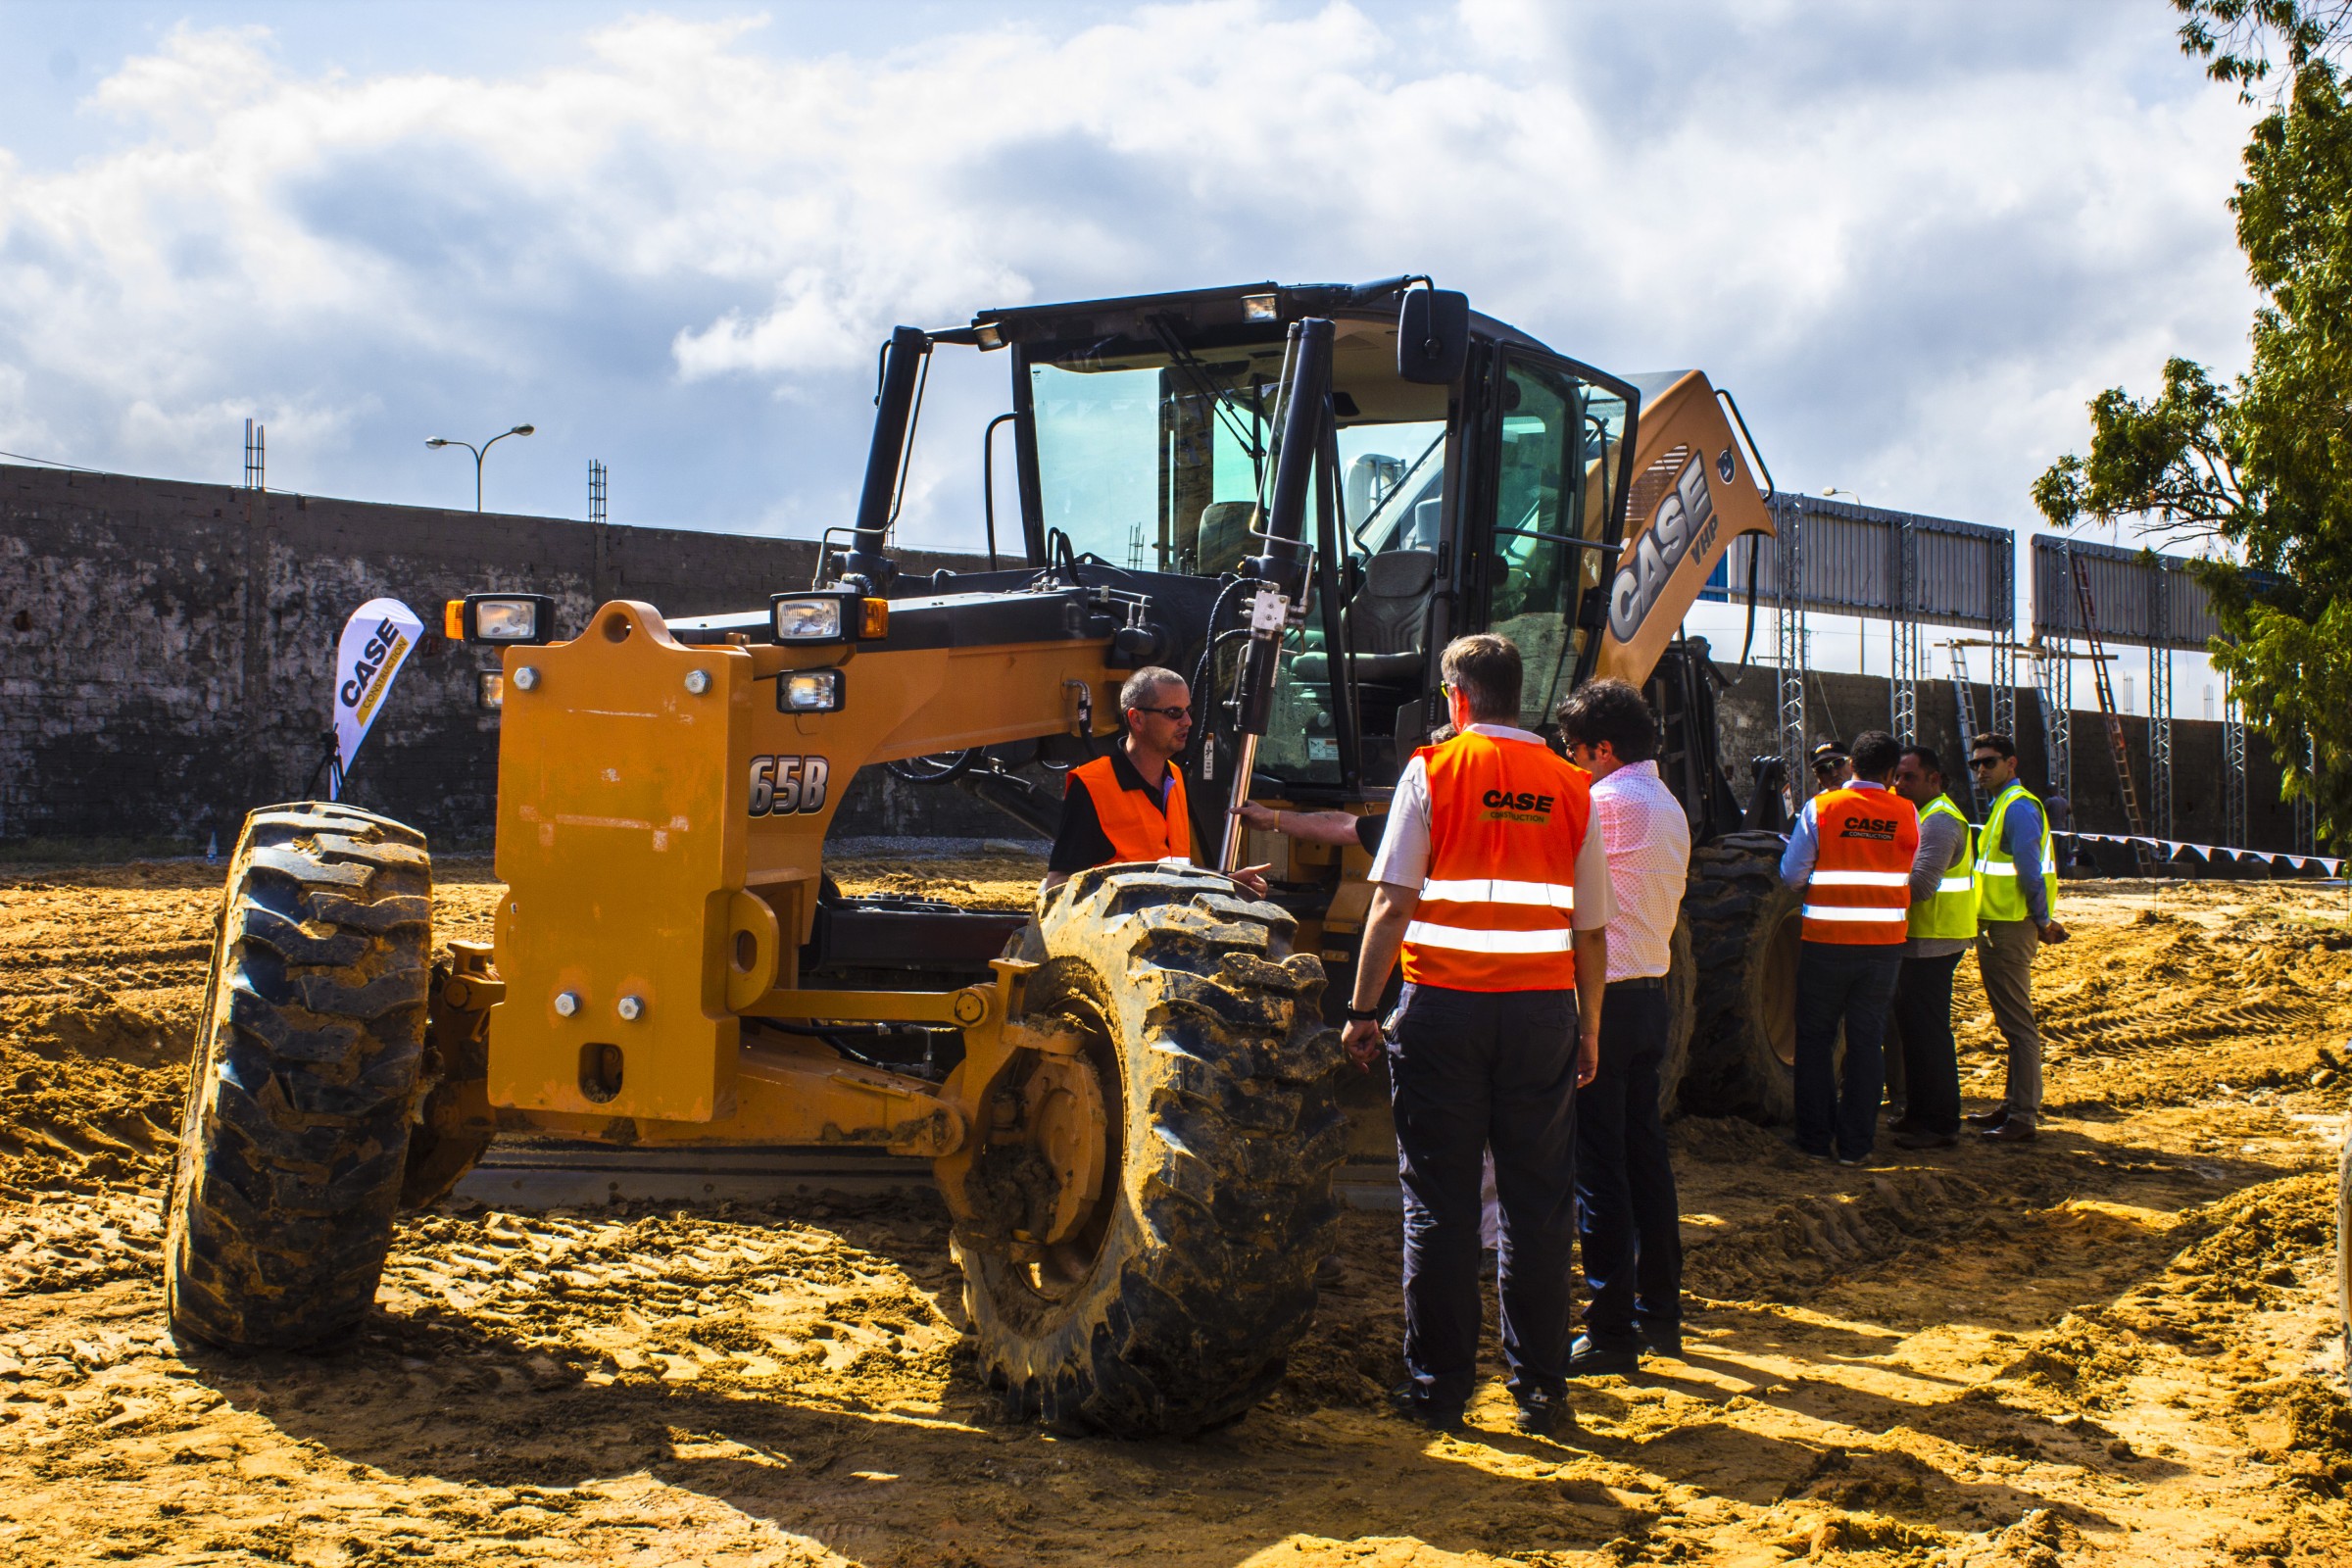 CASE DEMONSTRATES ROAD-BUILDING EQUIPMENT AT ITS BEST IN EXTREME CONDITIONS